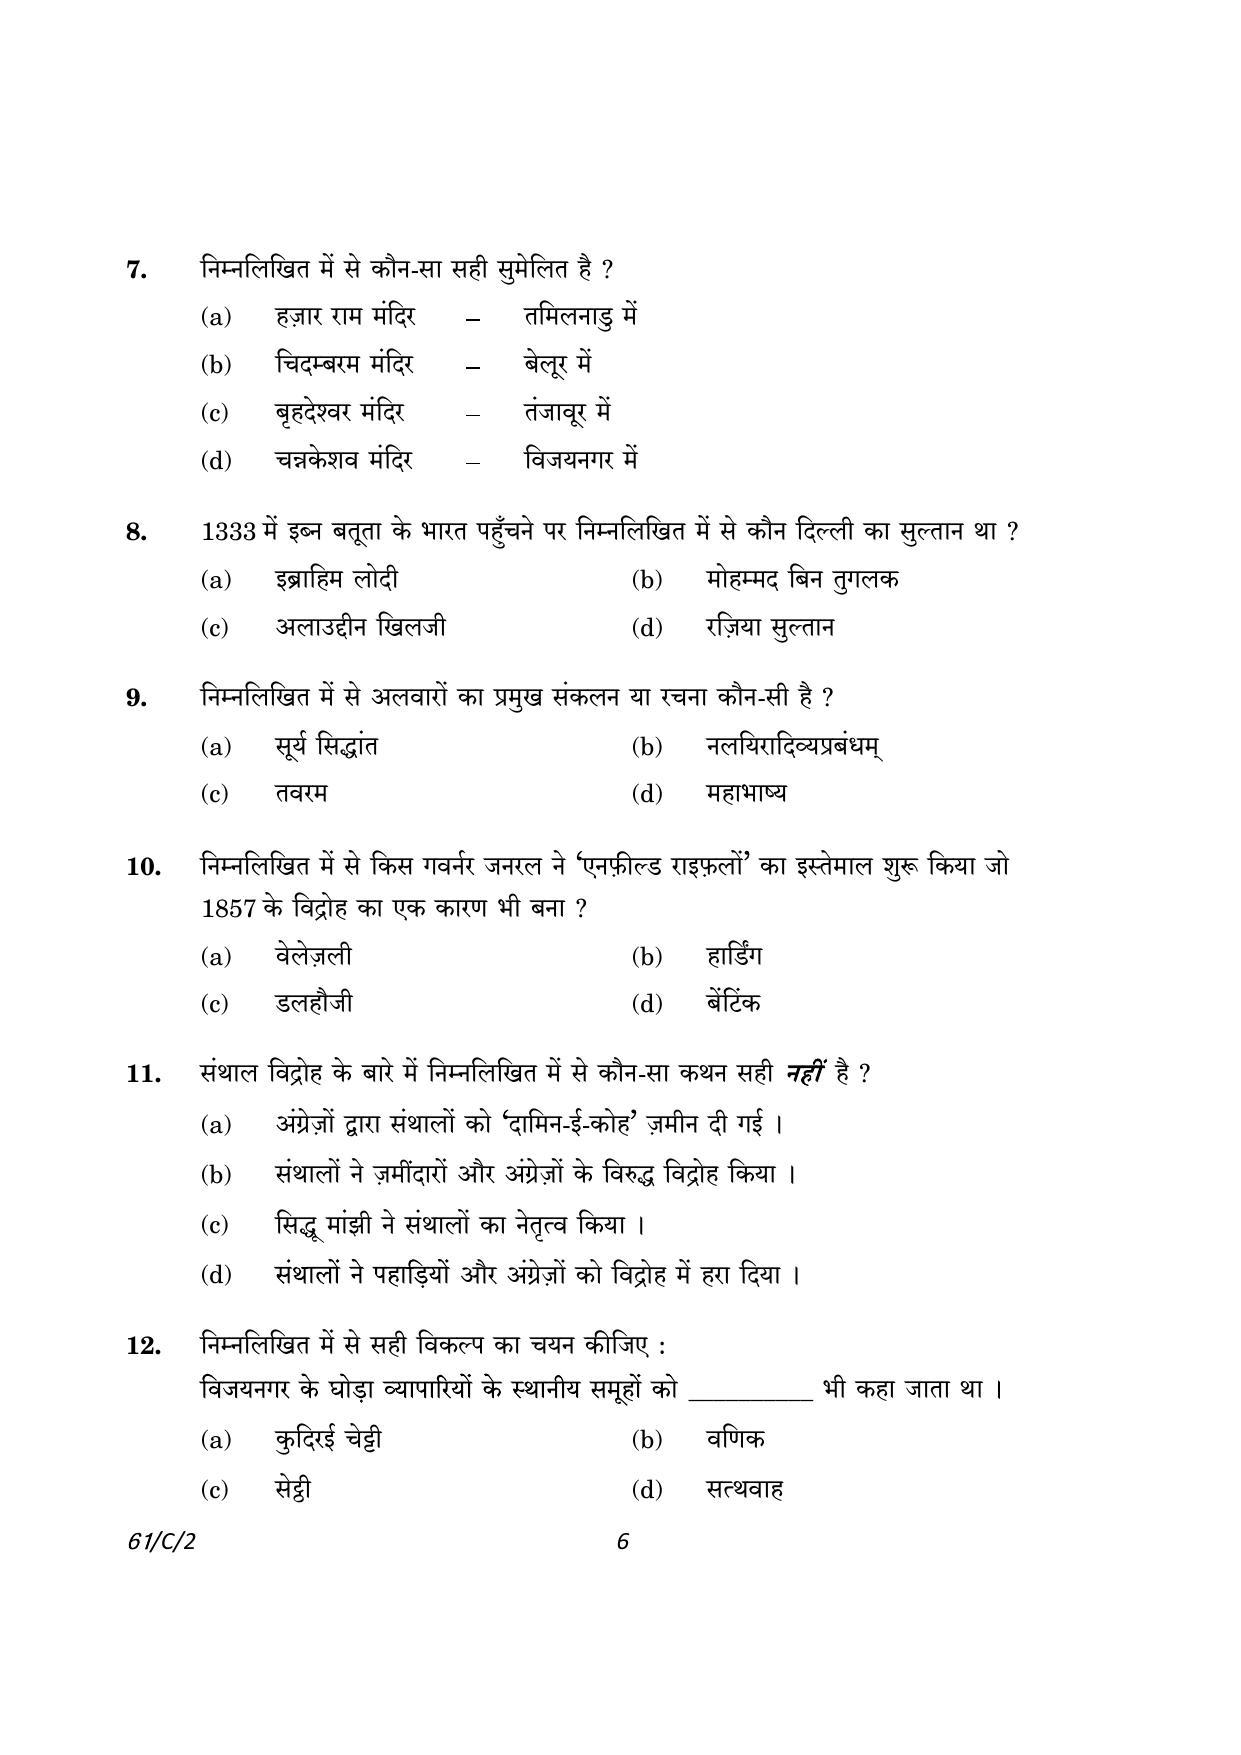 CBSE Class 12 61-2 History 2023 (Compartment) Question Paper - Page 6